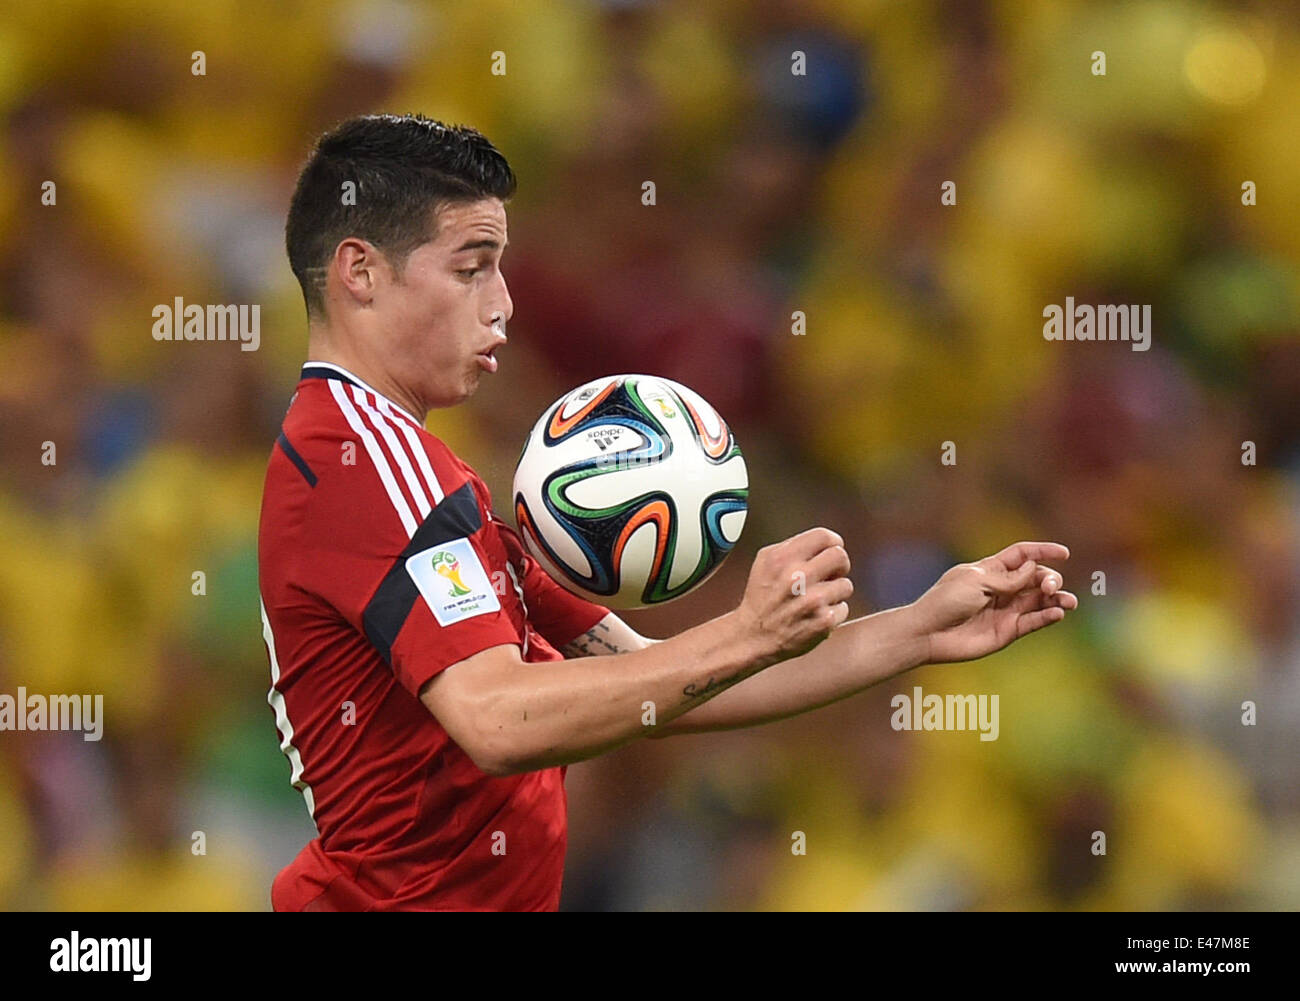 Fortaleza, Brazil. 04th July, 2014. James Rodriguez of Colombia in action during the FIFA World Cup 2014 quarter final match soccer between Brazil and Colombia at the Estadio Castelao in Fortaleza, Brazil, 04 July 2014. Photo: Marius Becker/dpa/Alamy Live News Stock Photo